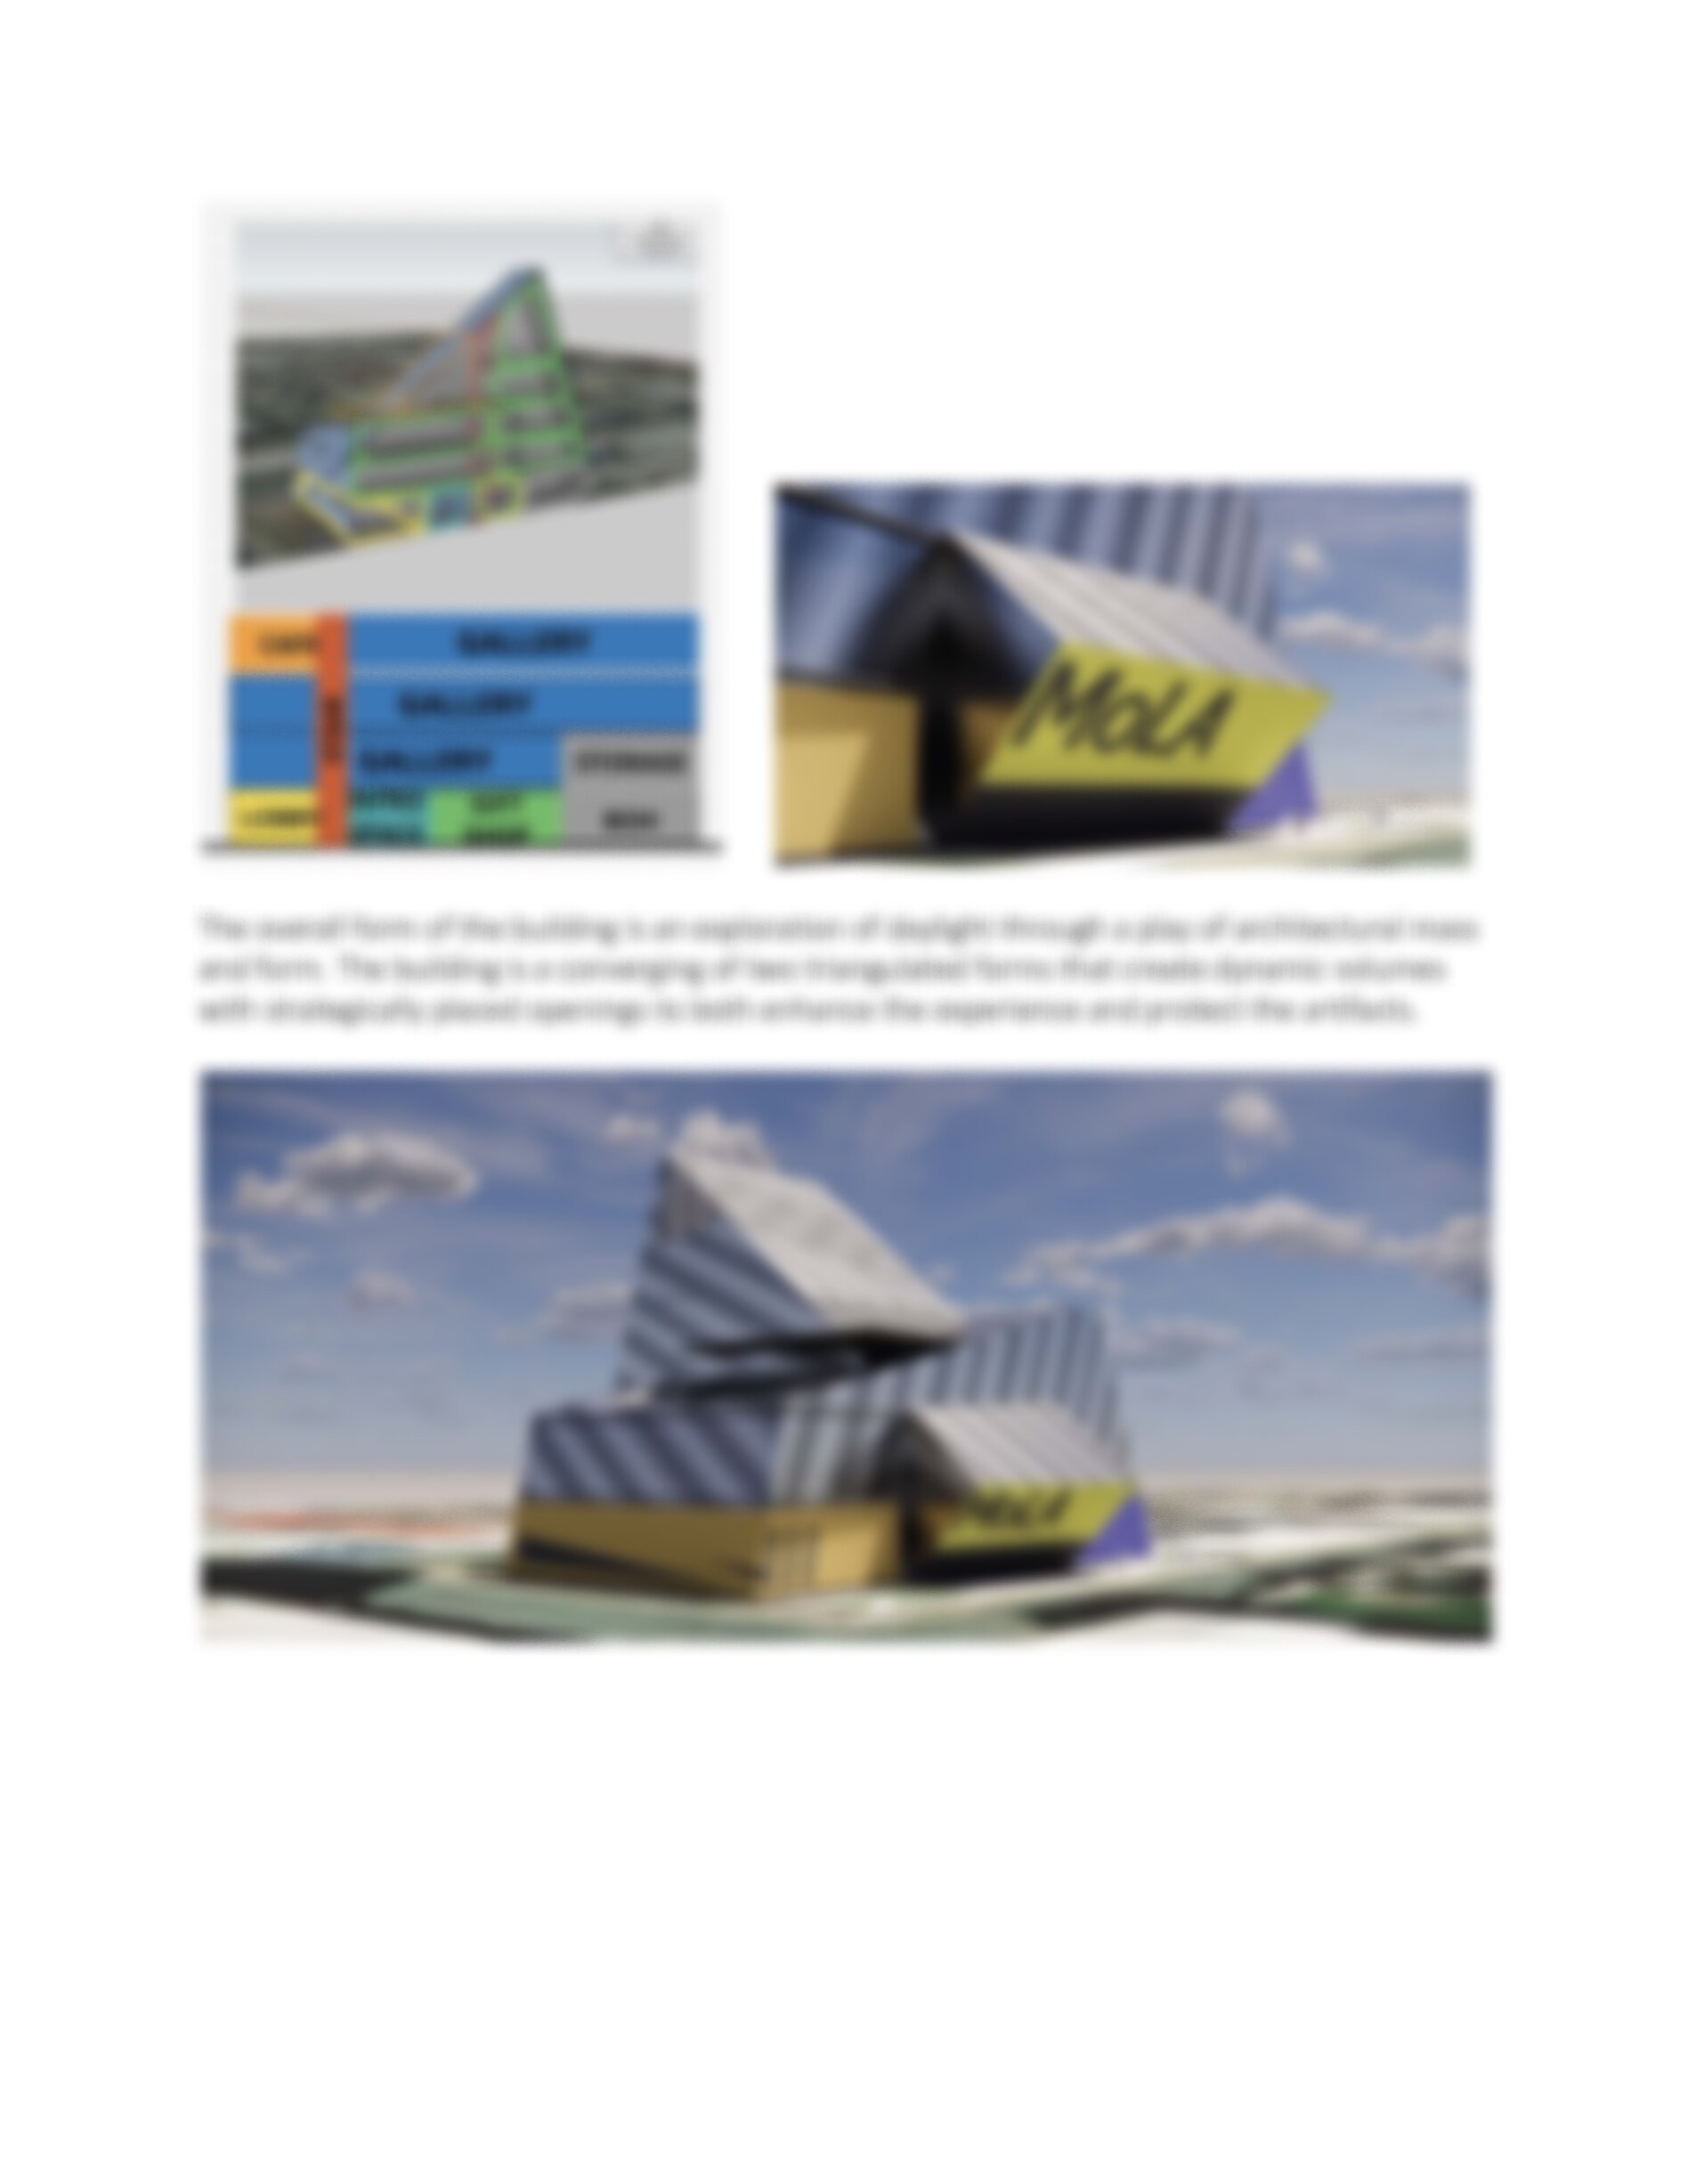 Architectural+Exploration+and+Intervention_Page_09.jpg